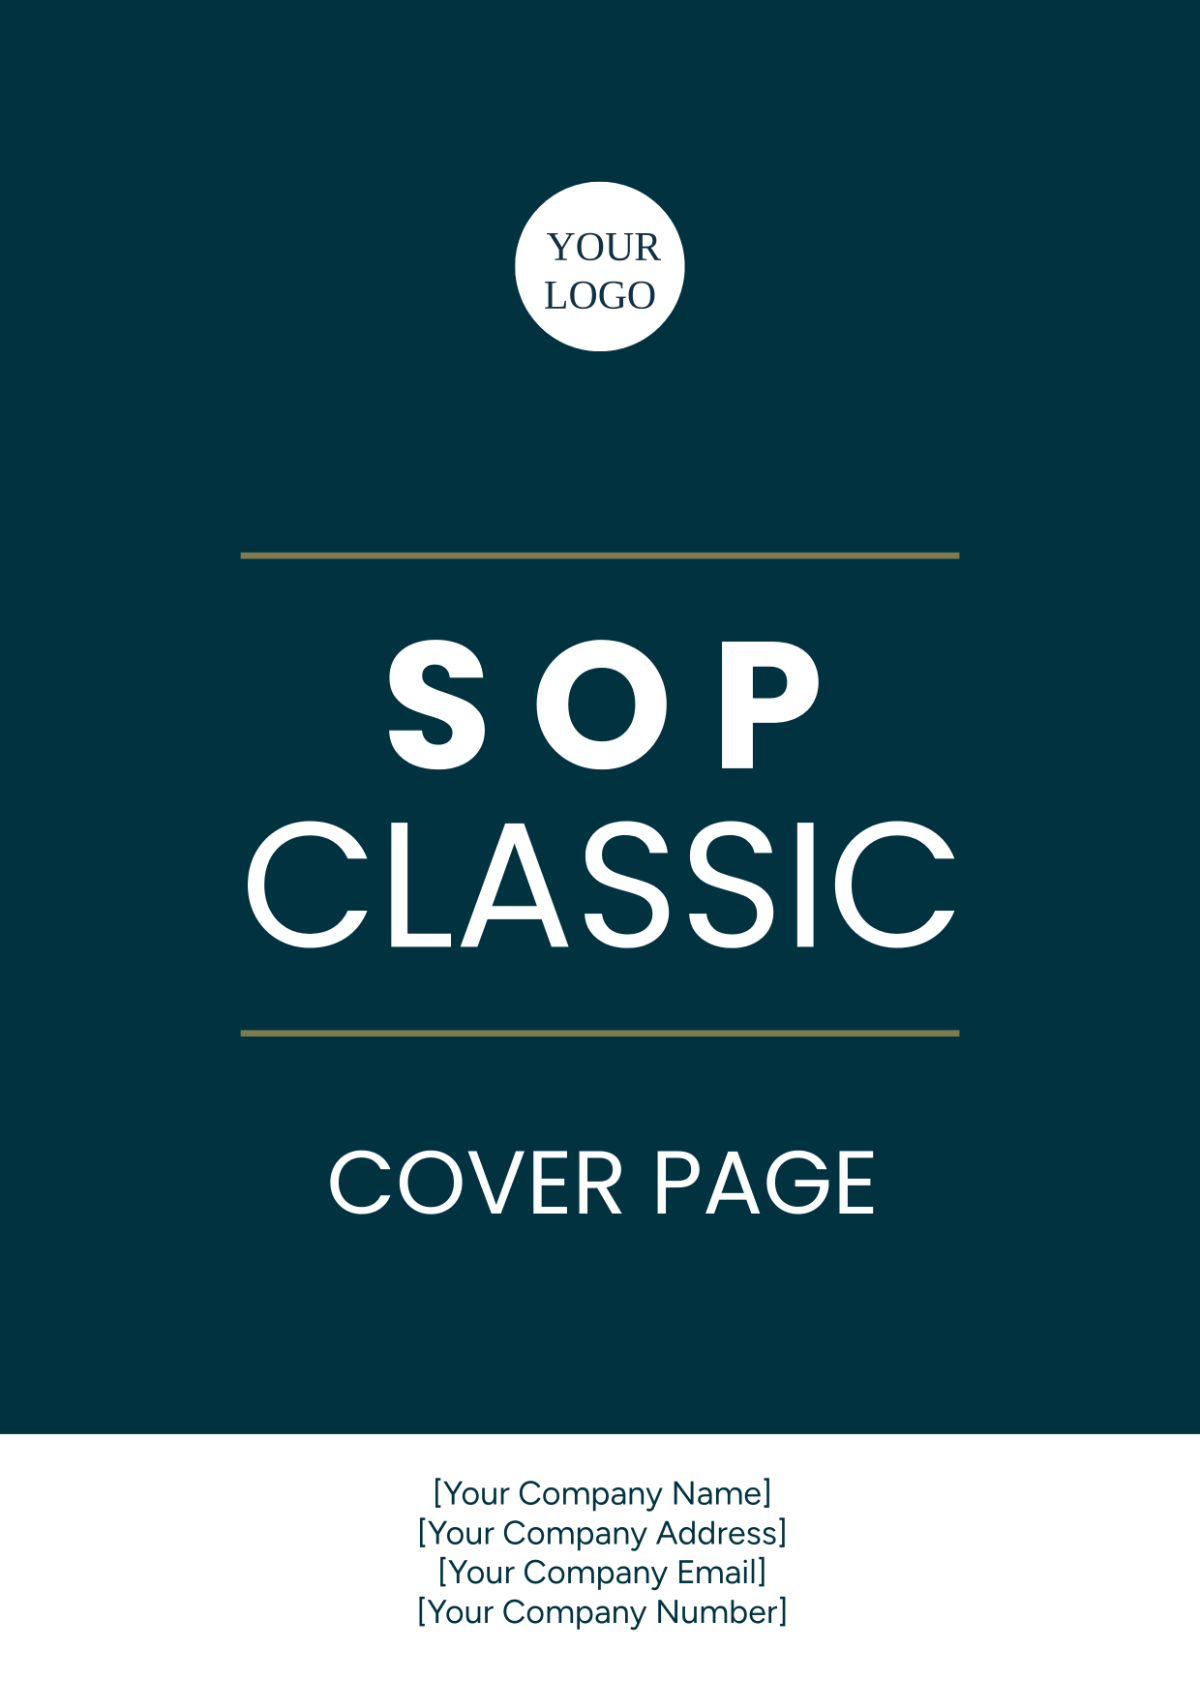 SOP Classic Cover Page